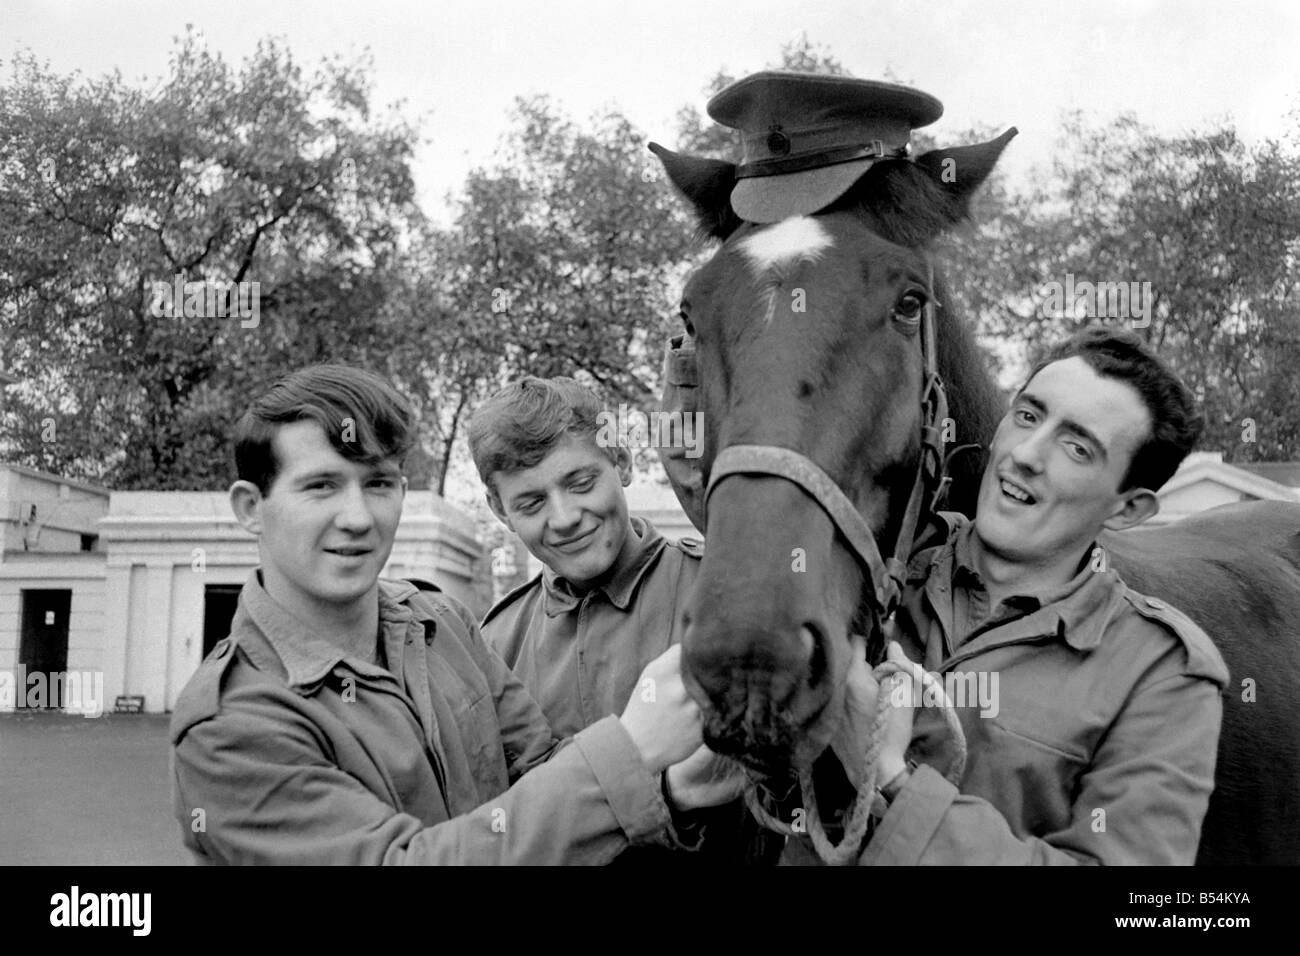 Stalin a young gelding who is one of the Queen's unwanted horses, has been given a reprieve and an attempt to re-train him is about to begin. November 1969 Z11167-004 Stock Photo